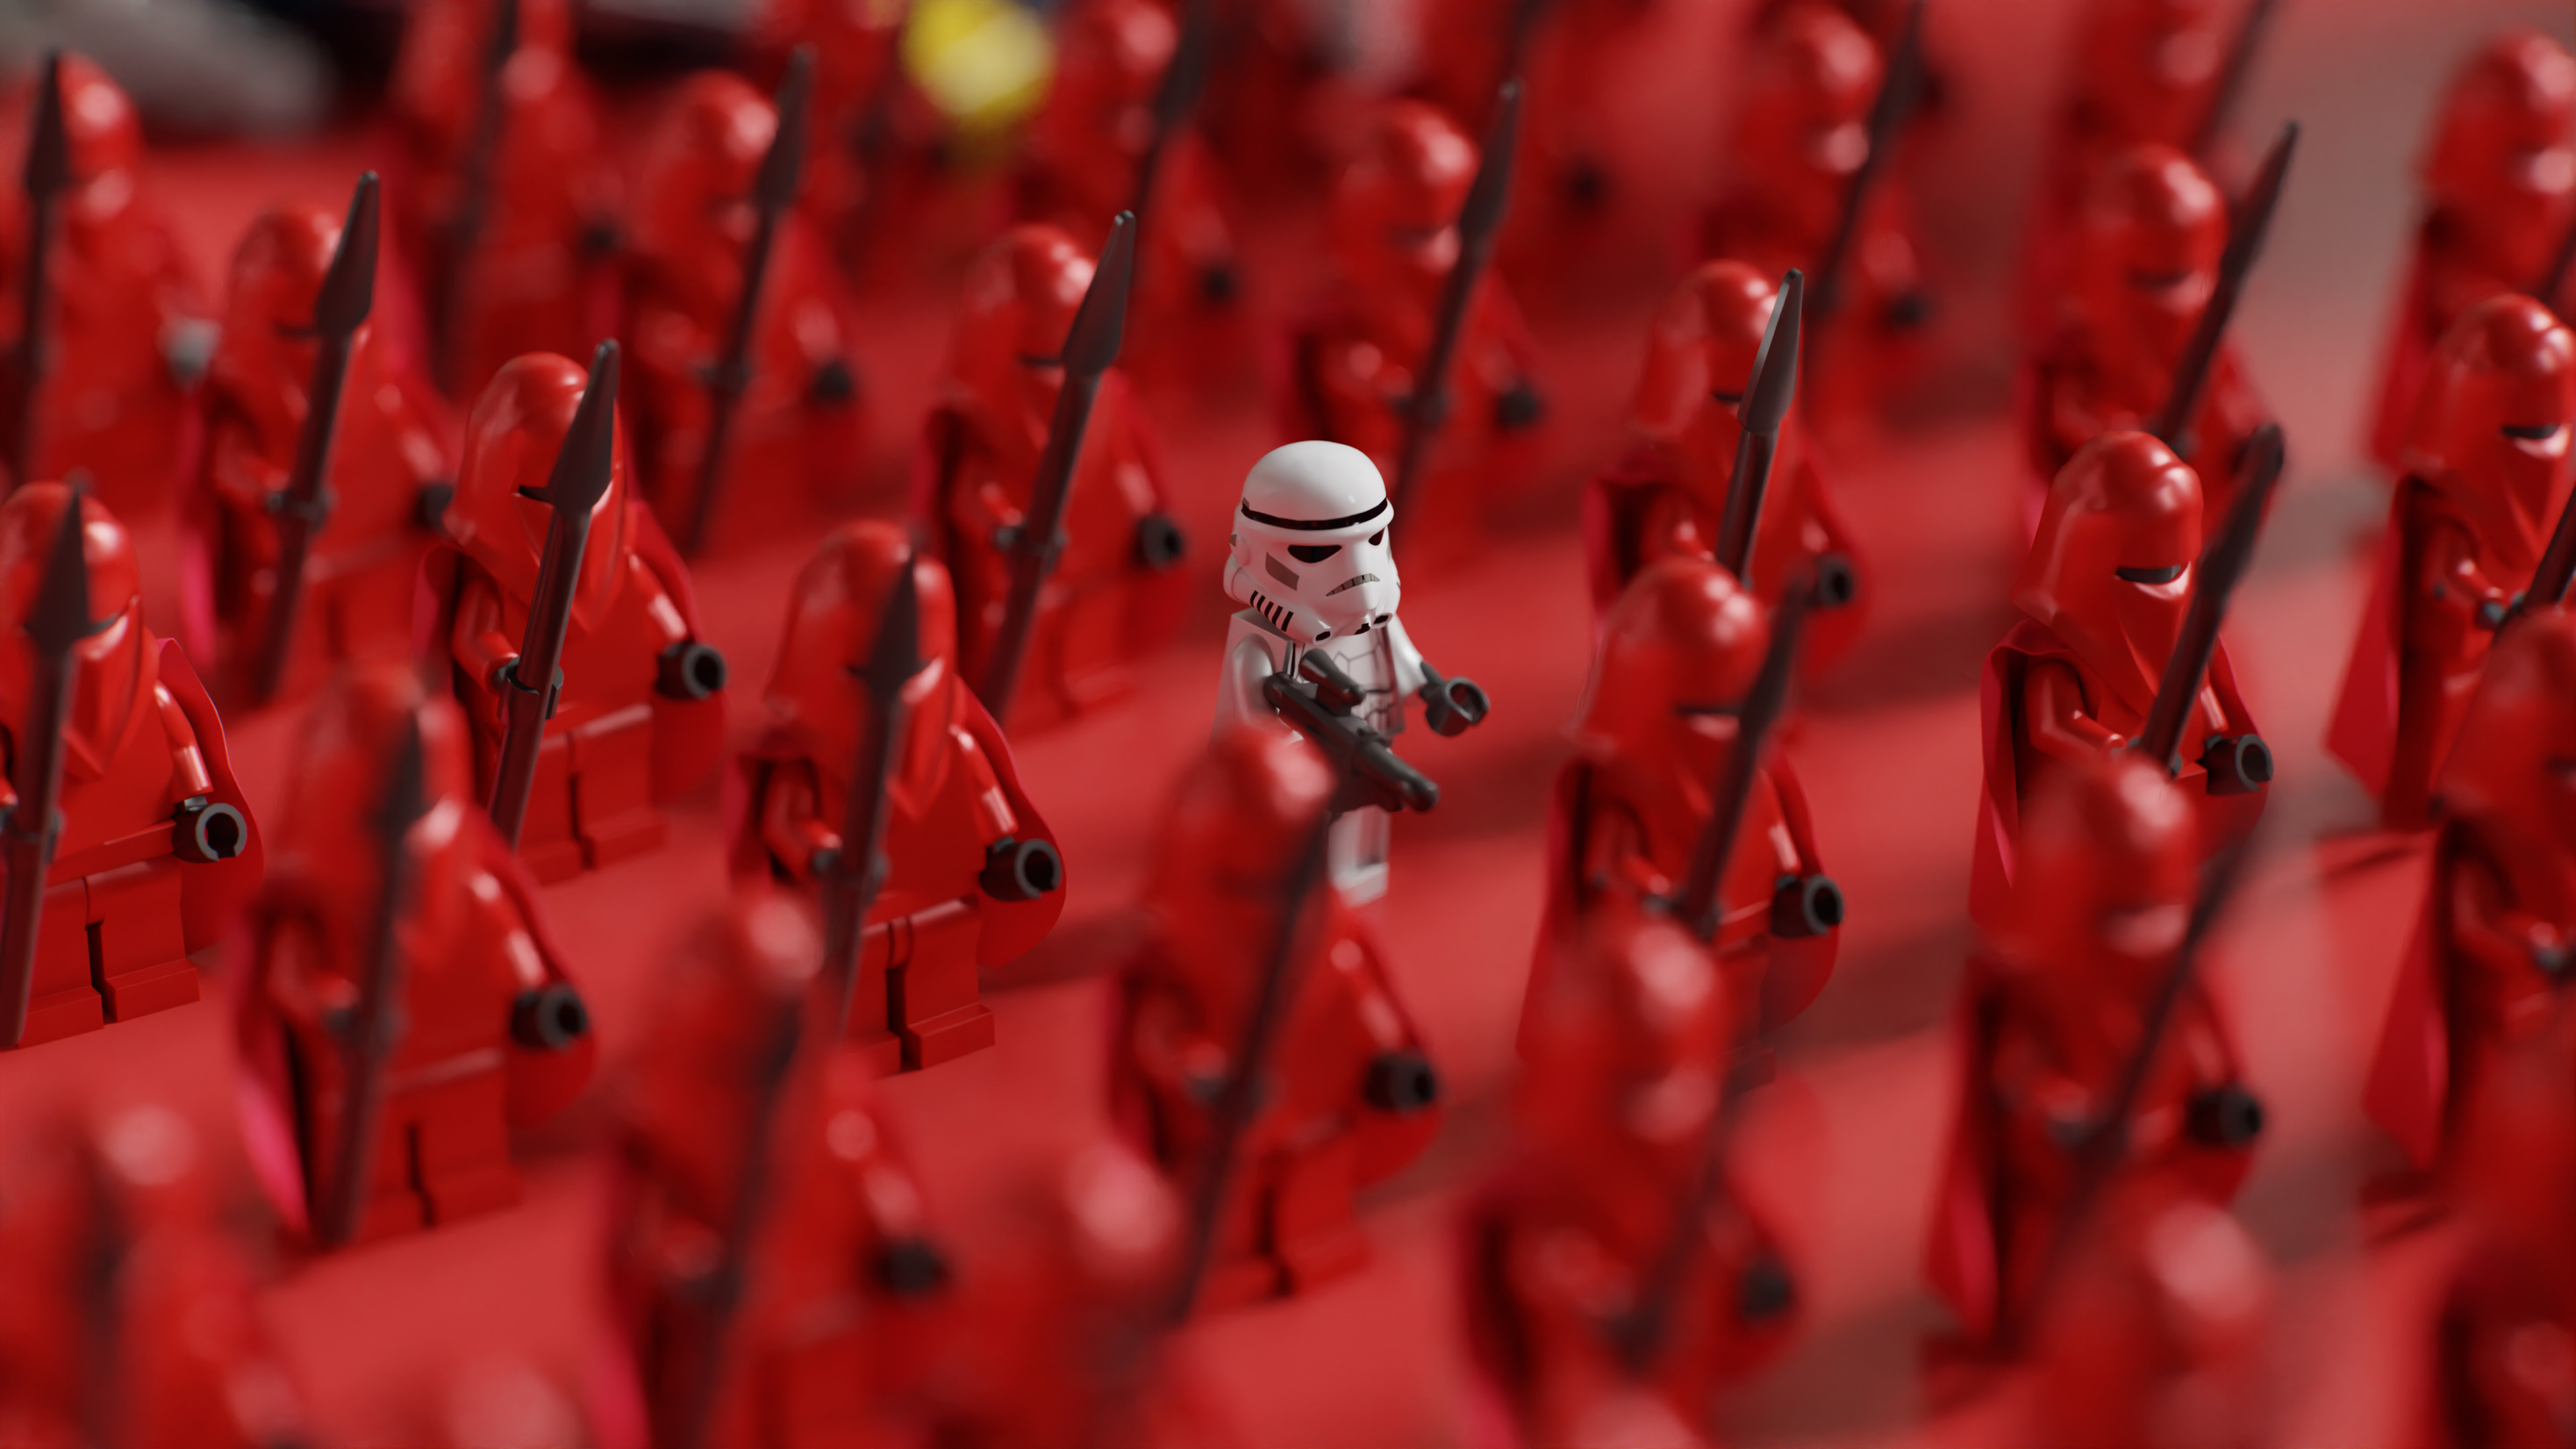 LEGO Star Wars Stormtrooper Red Guardian Tilt Shift Macro LEGO Star Wars Movie Characters Toys 3840x2160